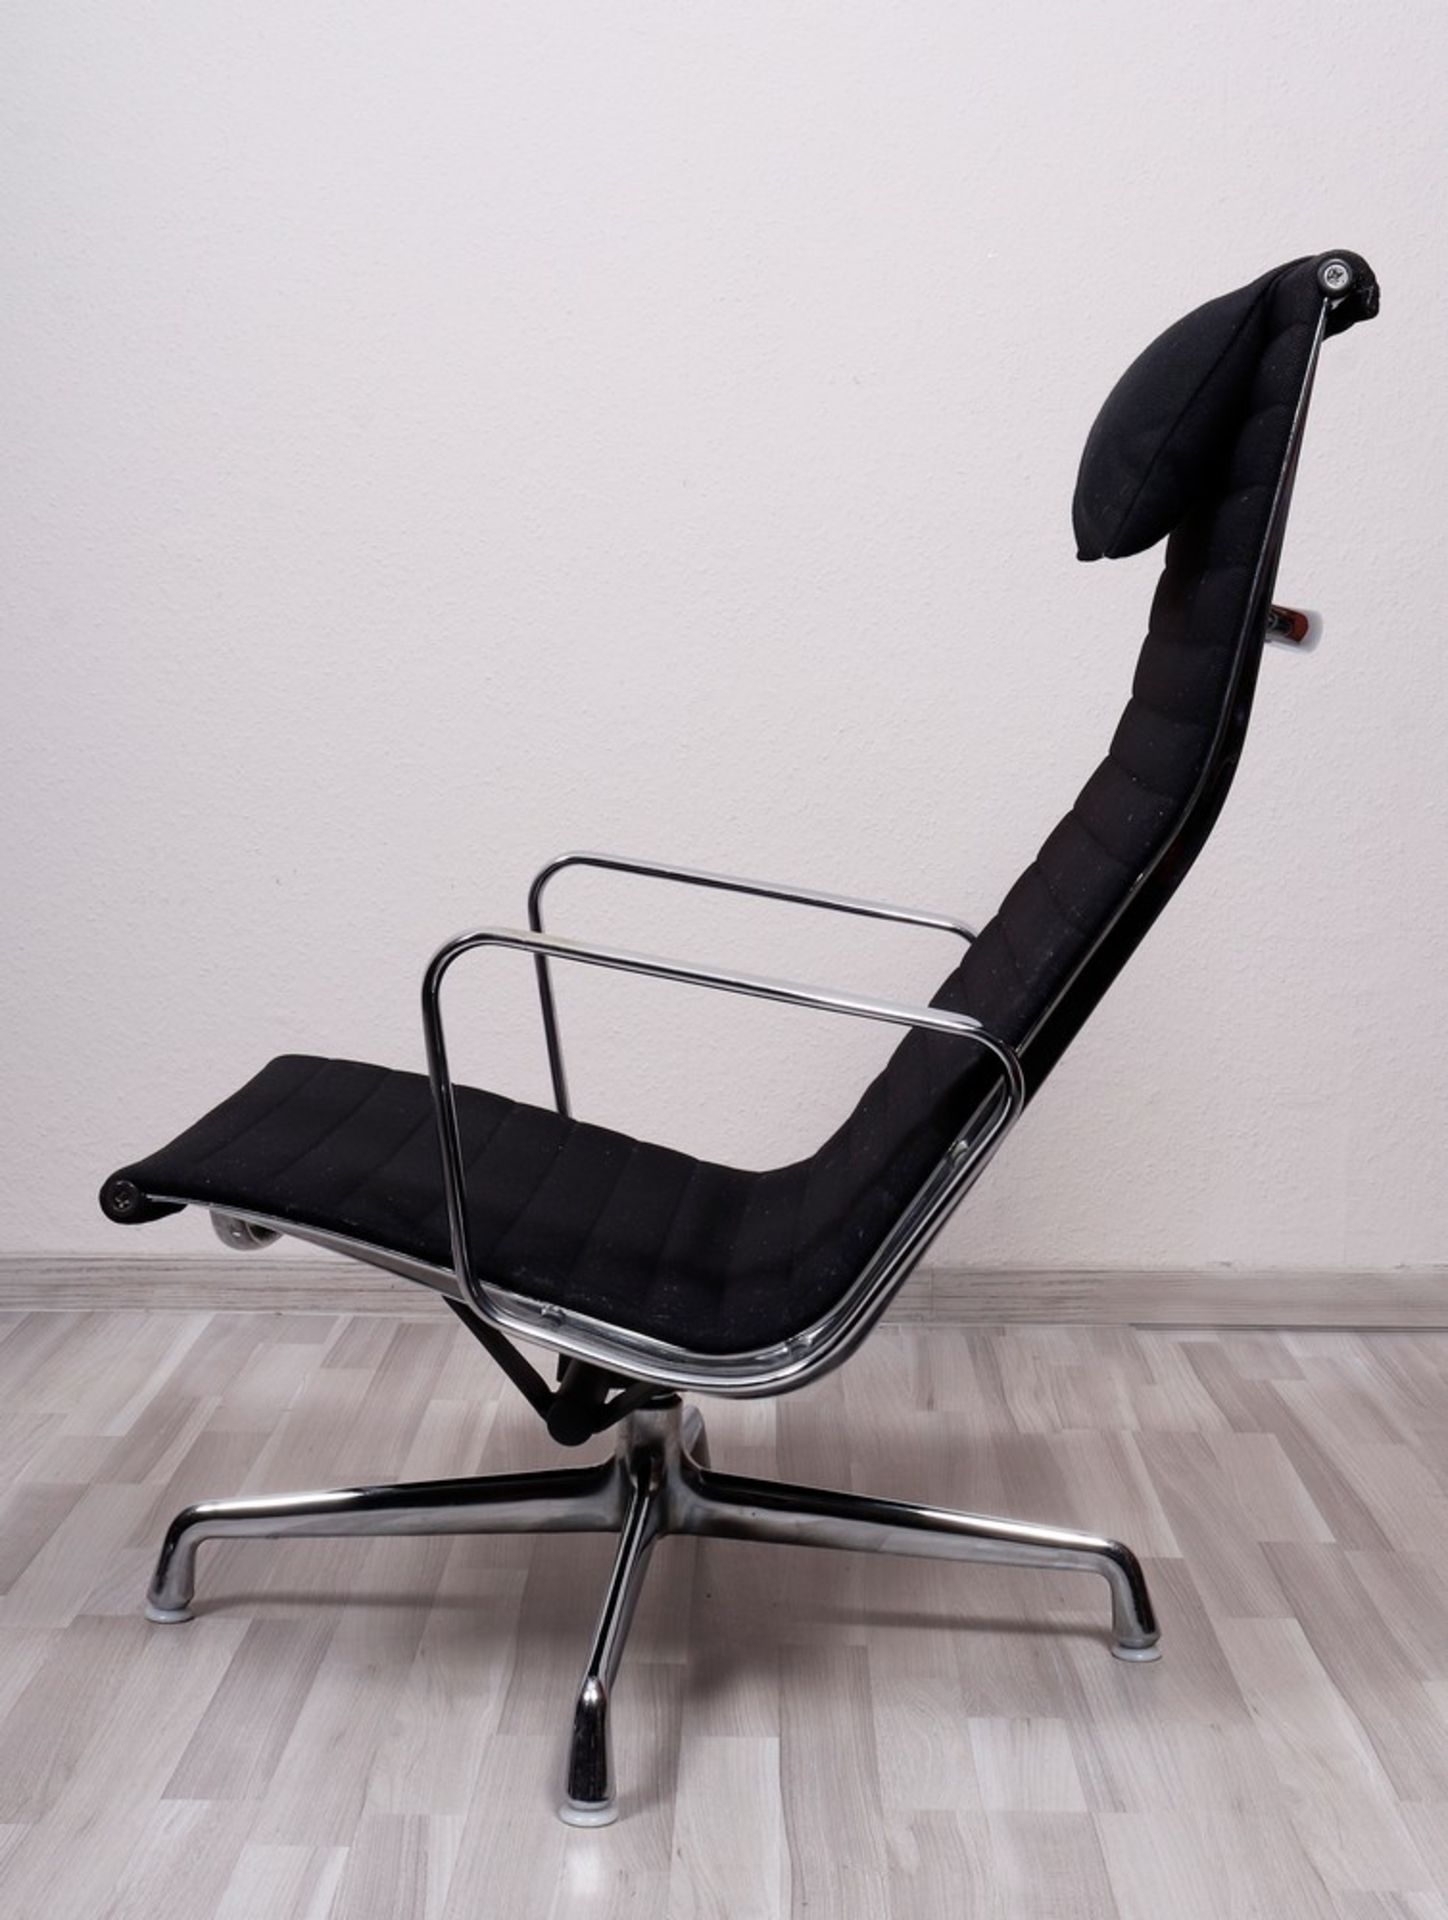 Lounge chair with ottoman, design Charles Eames for Herman Miller, 1960s - Image 2 of 7